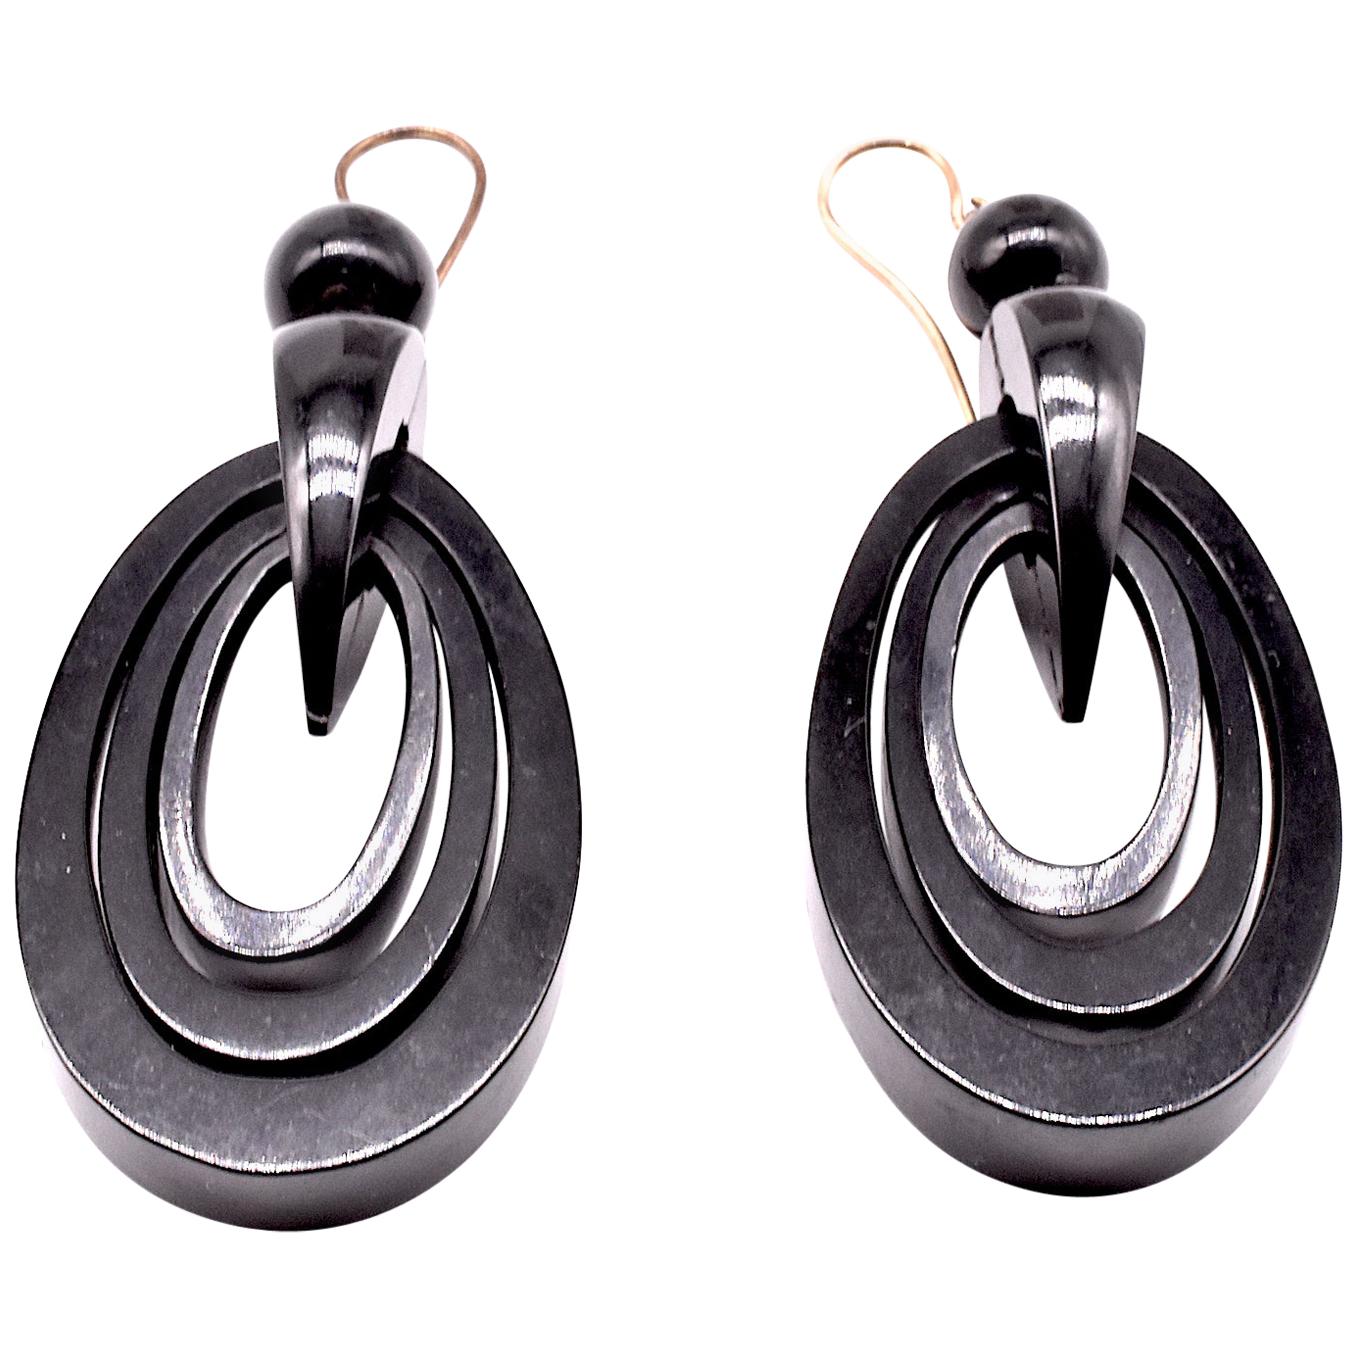 Antique Architectural Concentric Circle Whitby Jet Earrings